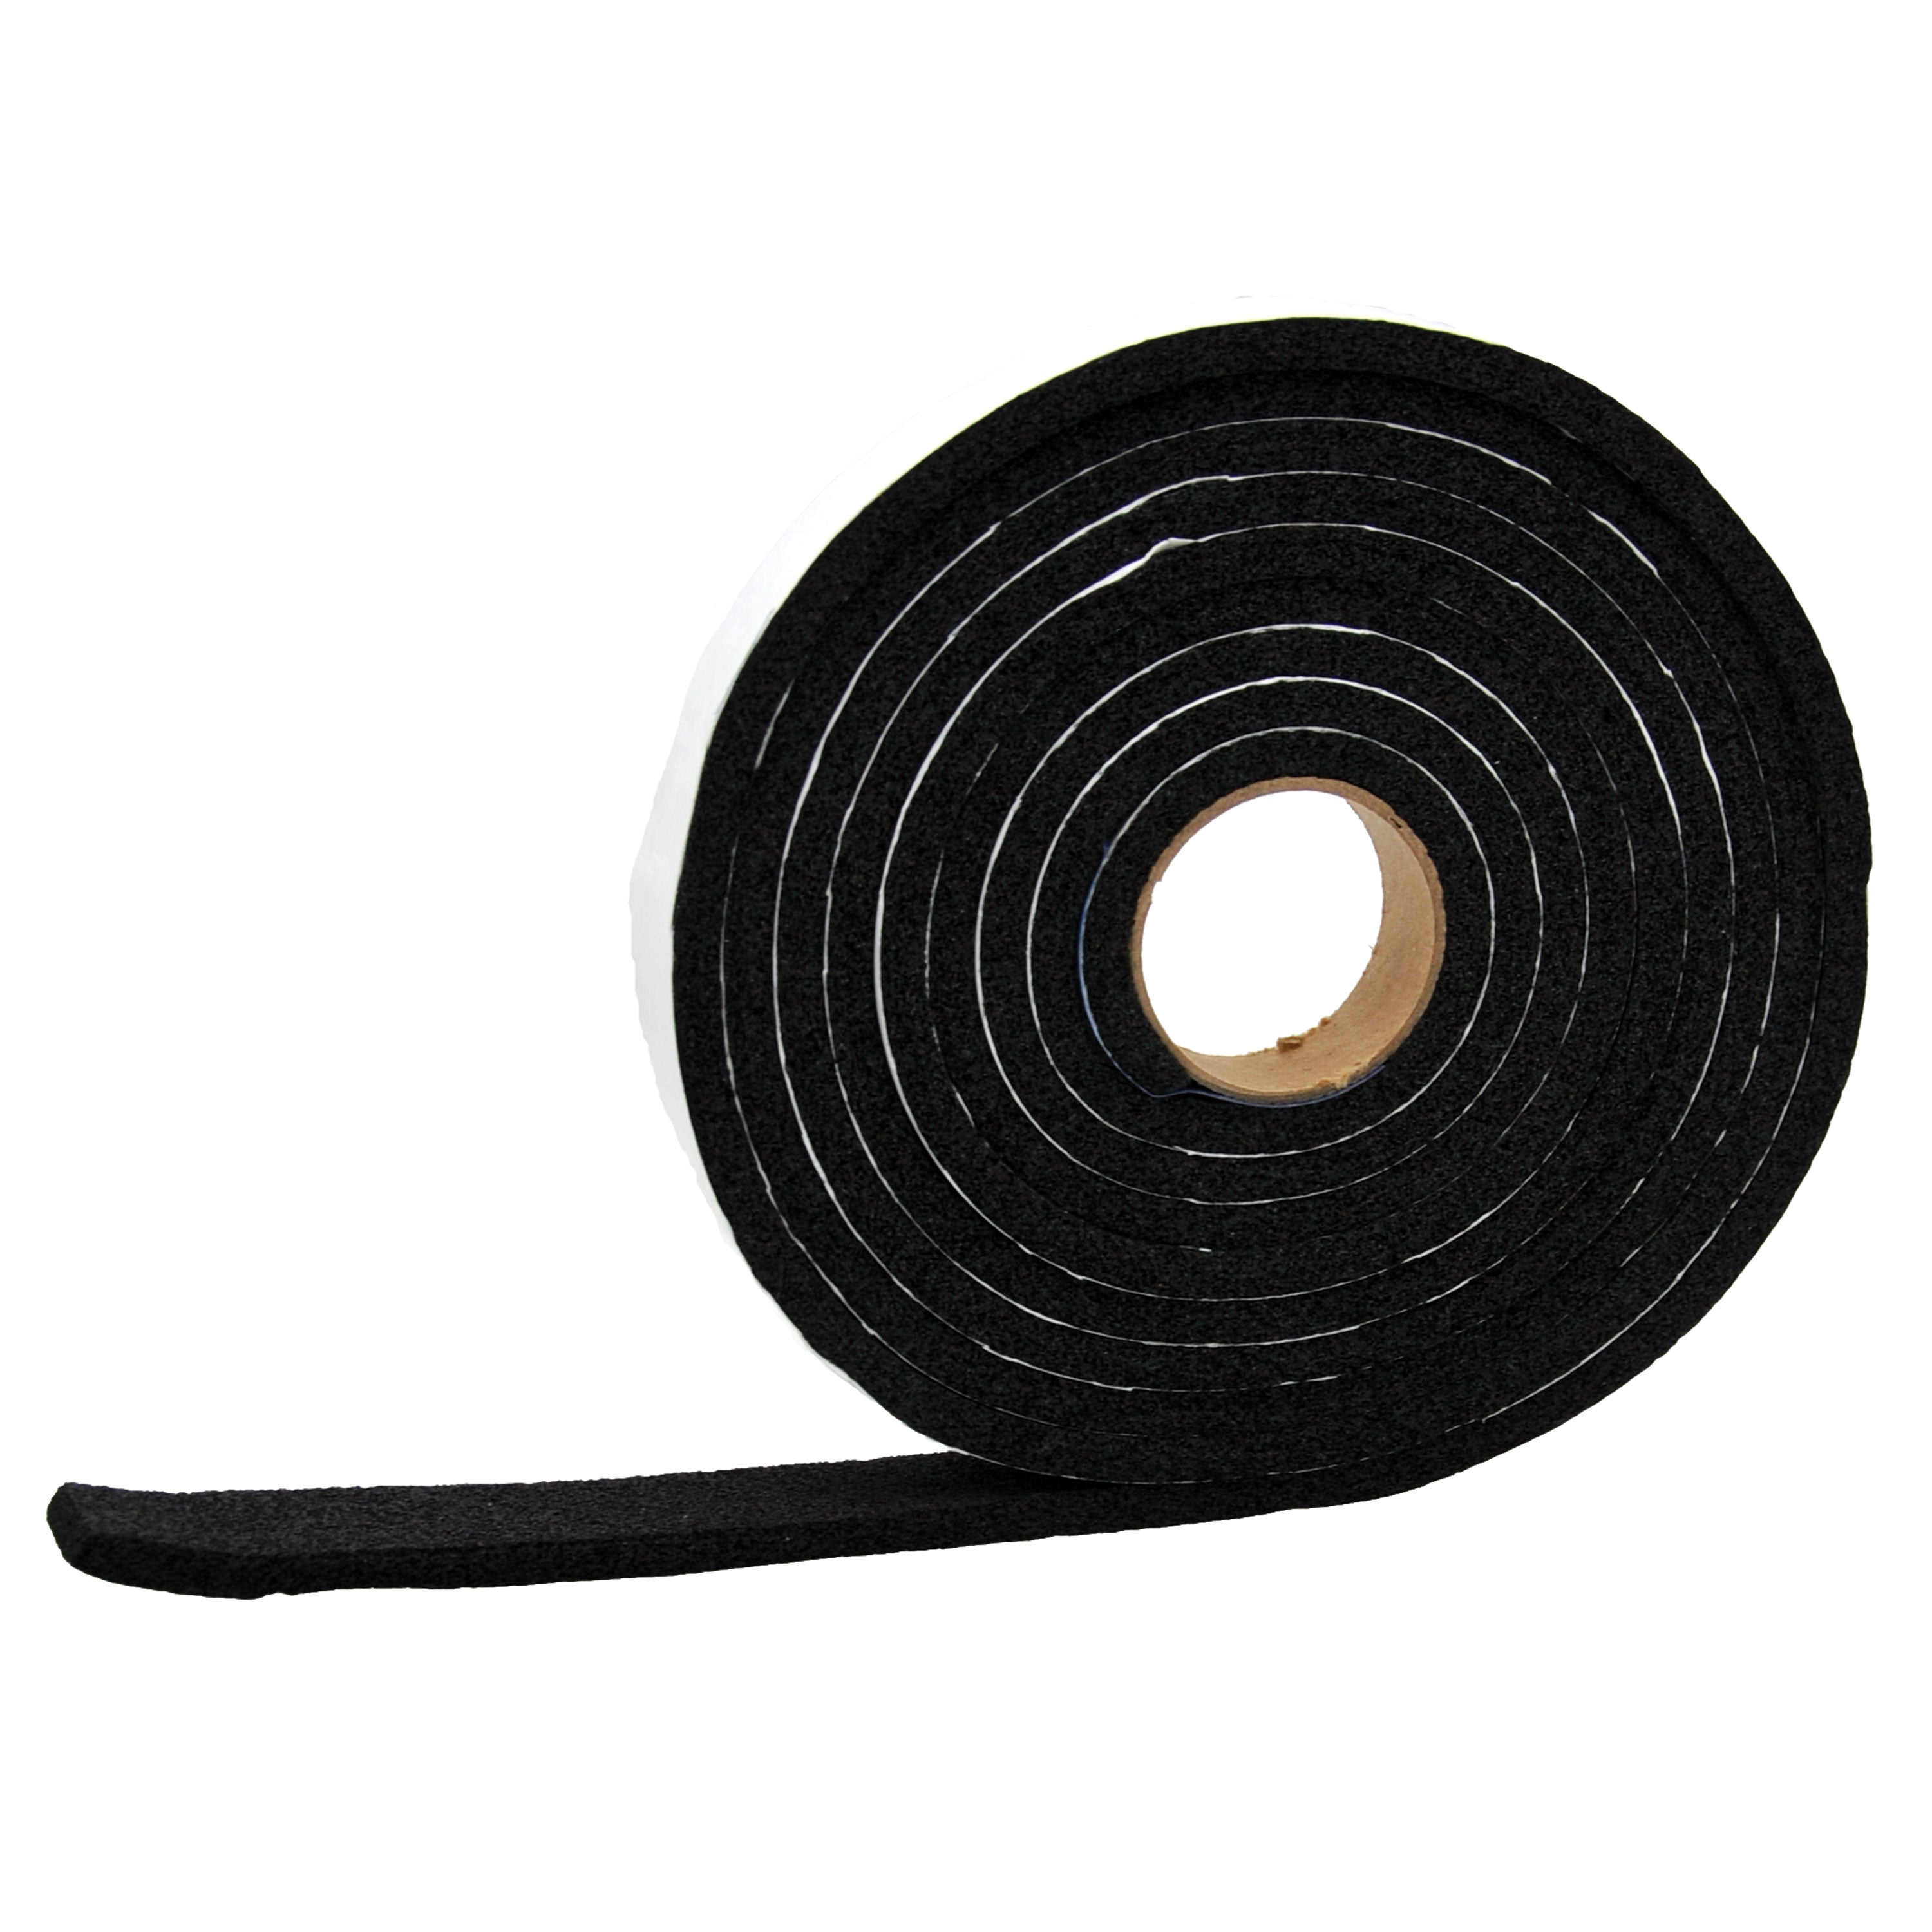 AP Products 018-3163810 Weather Stripping - 3/16" x 3/8" x 10'